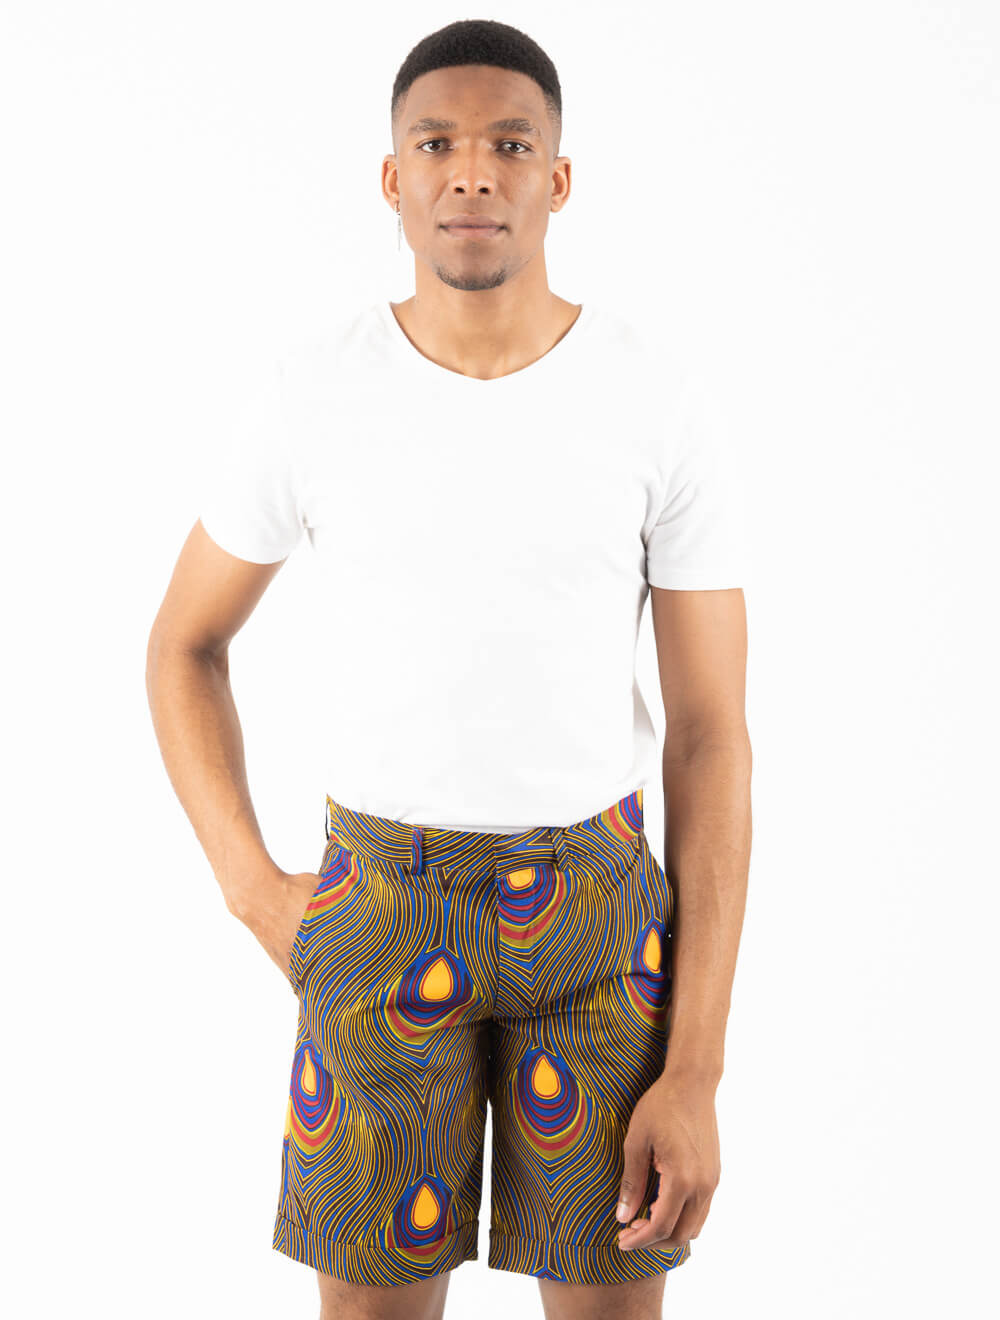 Shop Luxury African Fashion Online with AFI